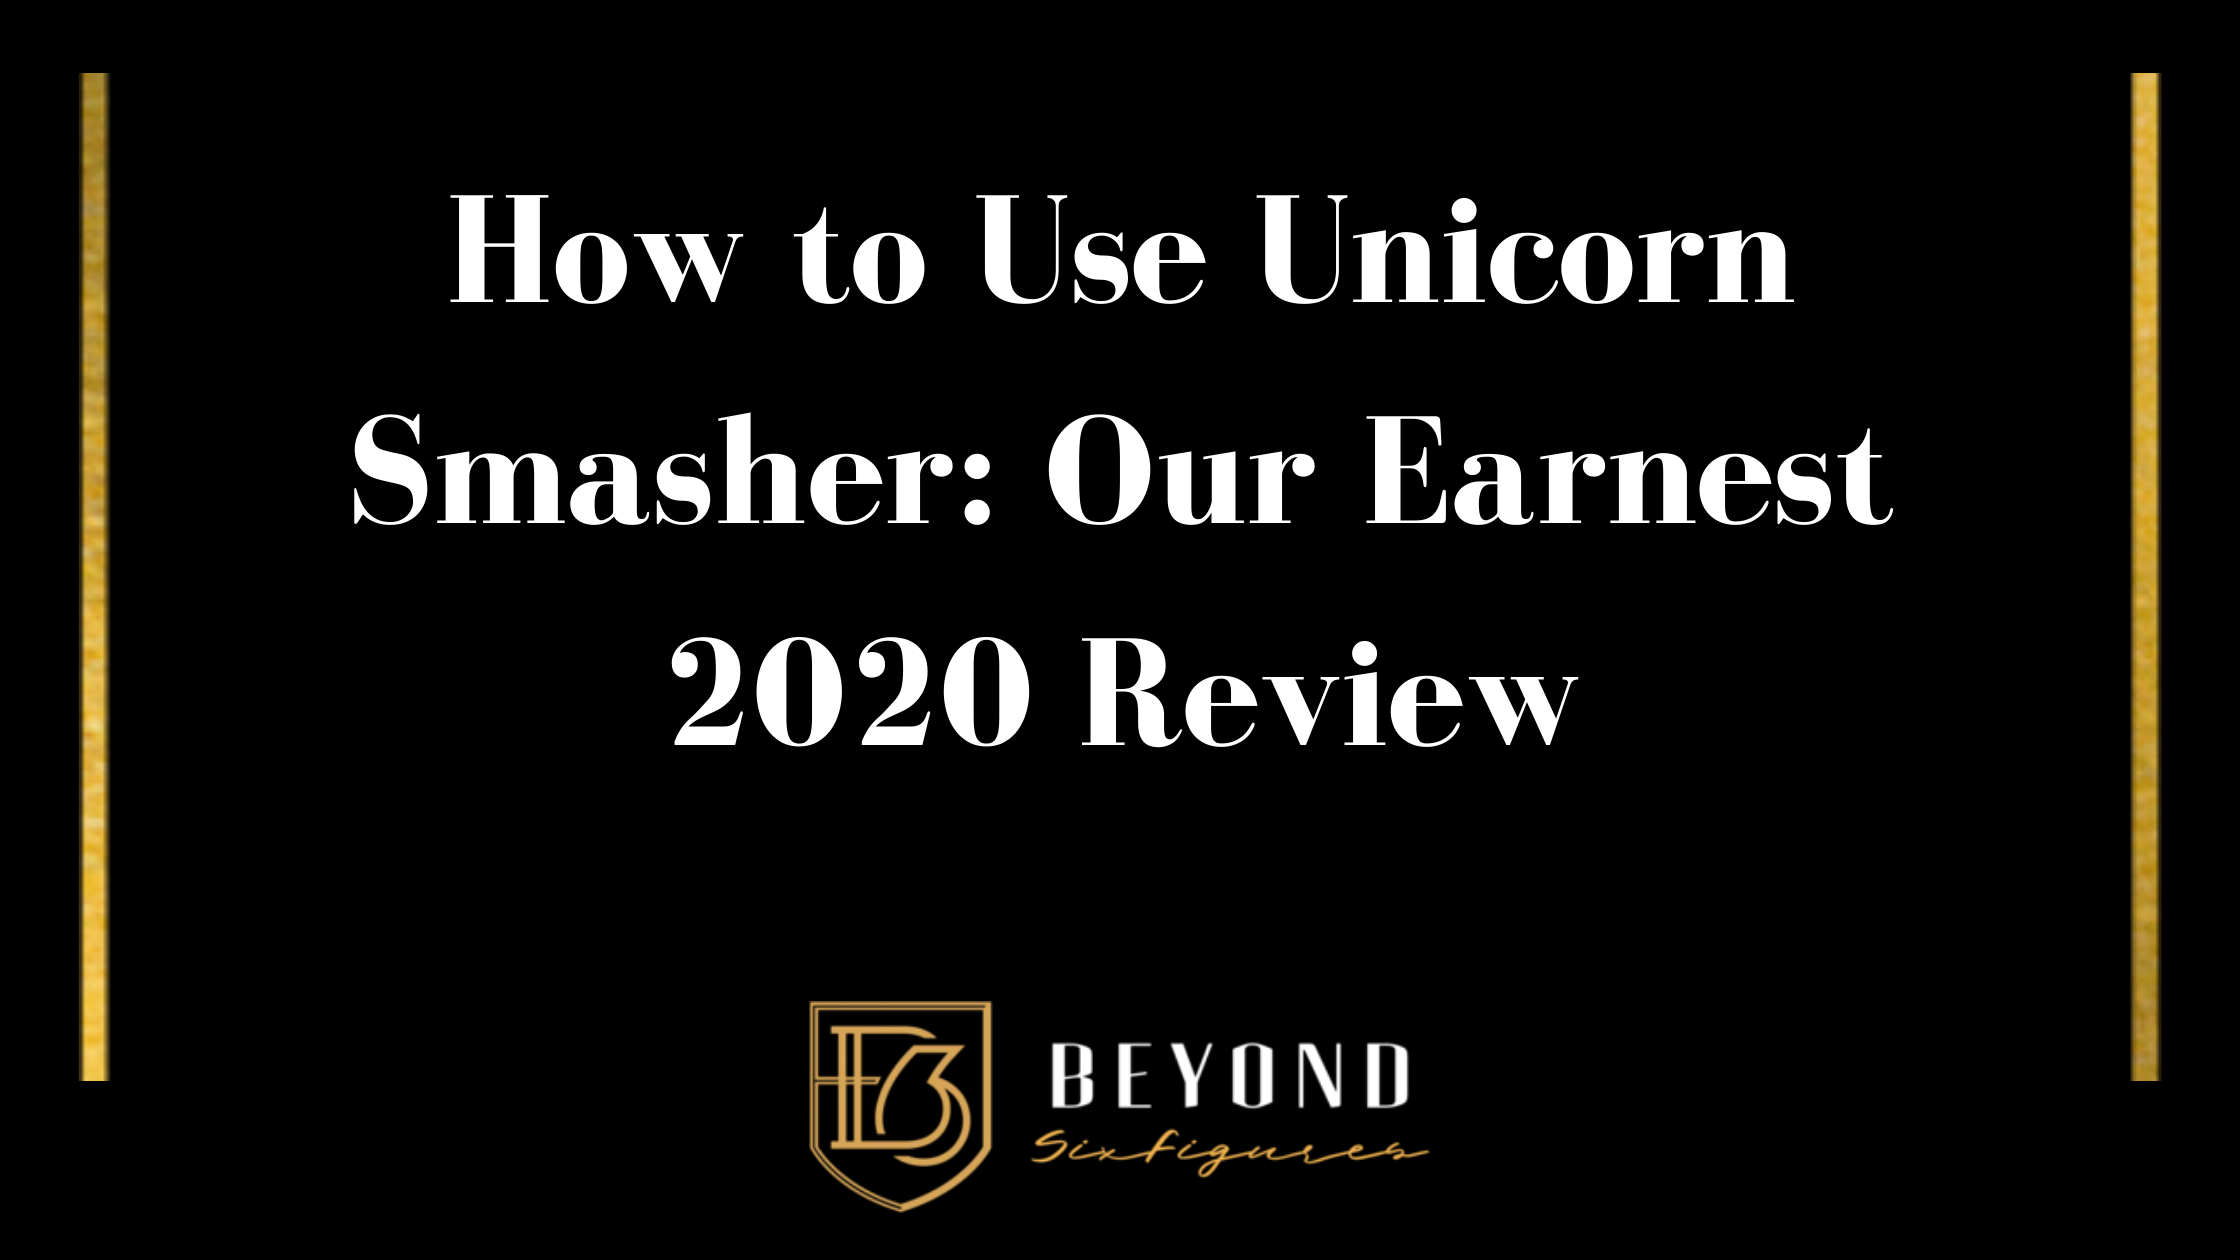 How to Use Unicorn Smasher: Our Earnest 2020 Review